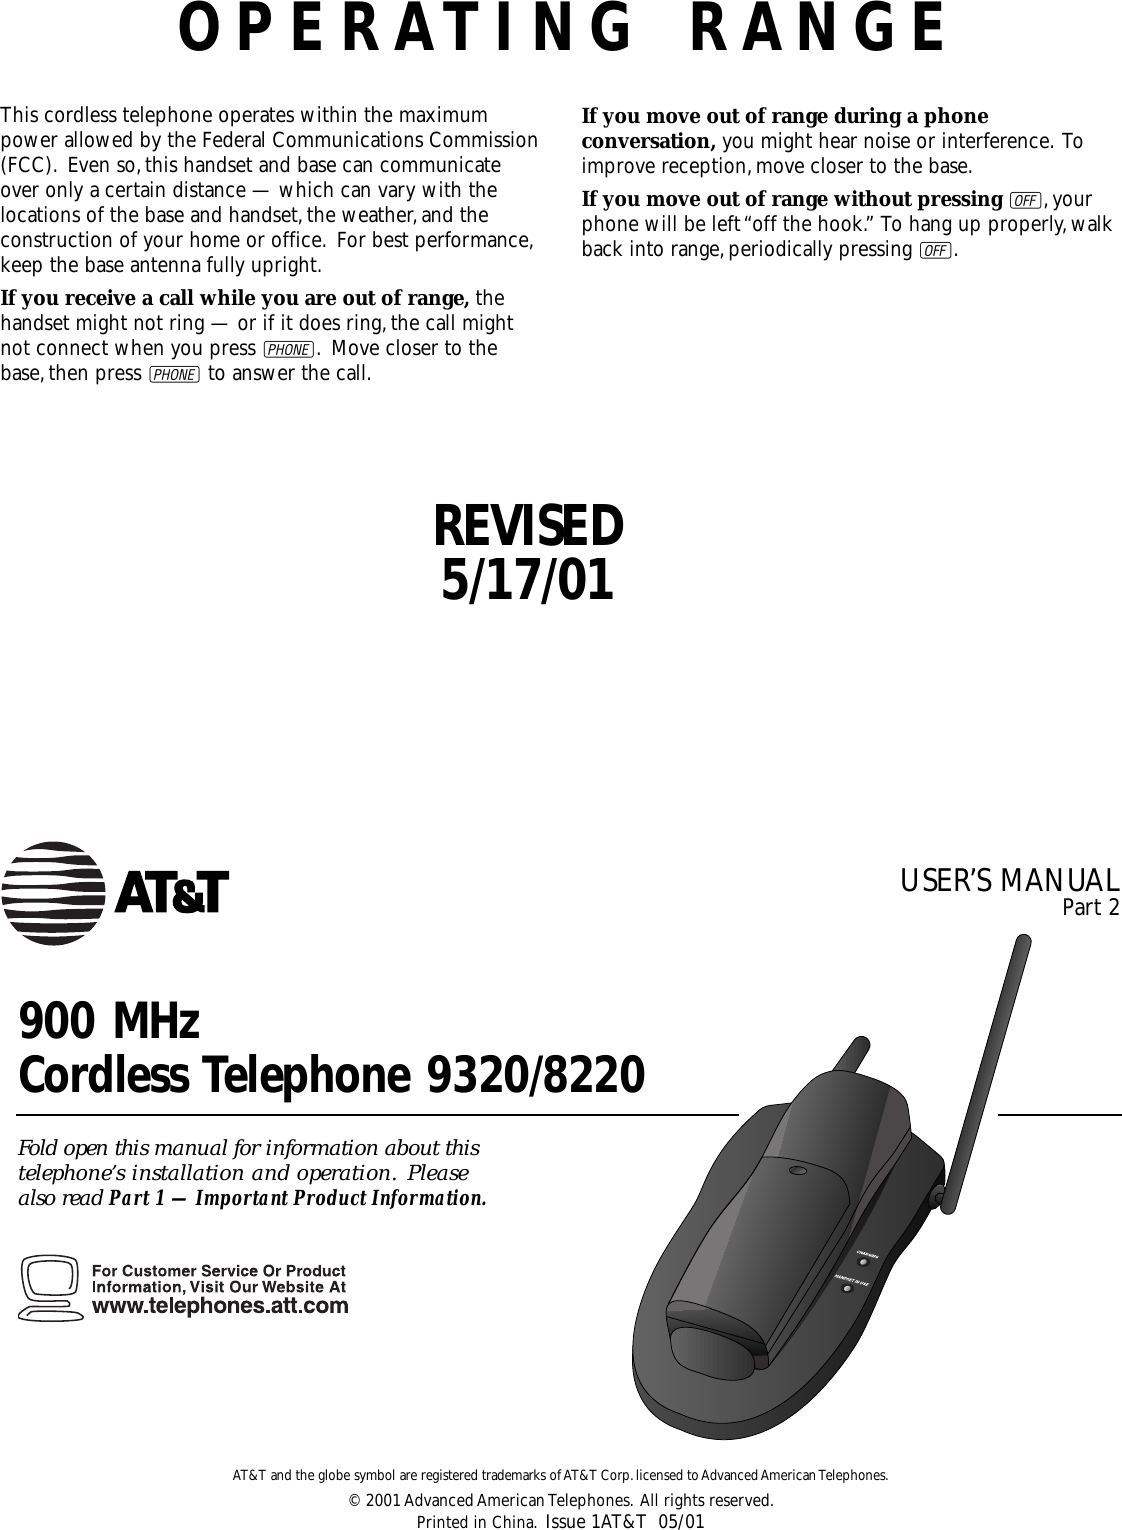 OPERATING RANGEThis cordless telephone operates within the maximumpower allowed by the Federal Communications Commission(FCC). Even so,this handset and base can communicateover only a certain distance — which can vary with thelocations of the base and handset,the weather,and theconstruction of your home or office. For best performance,keep the base antenna fully upright.If you receive a call while you are out of range, thehandset might not ring — or if it does ring,the call mightnot connect when you press P. Move closer to thebase,then press Pto answer the call.If you move out of range during a phoneconversation, you might hear noise or interference. Toimprove reception,move closer to the base.If you move out of range without pressing O,yourphone will be left “off the hook.” To hang up properly,walkback into range,periodically pressing O.900 MHz Cordless Telephone 9320/8220Fold open this manual for information about this telephone’s installation and operation. Please also read Part 1 — Important Product Information.AT&amp;T and the globe symbol are registered trademarks of AT&amp;T Corp.licensed to Advanced American Telephones.© 2001 Advanced American Telephones. All rights reserved.Printed in China. Issue 1AT&amp;T  05/01USER’S MANUAL Part 2REVISED5/17/01